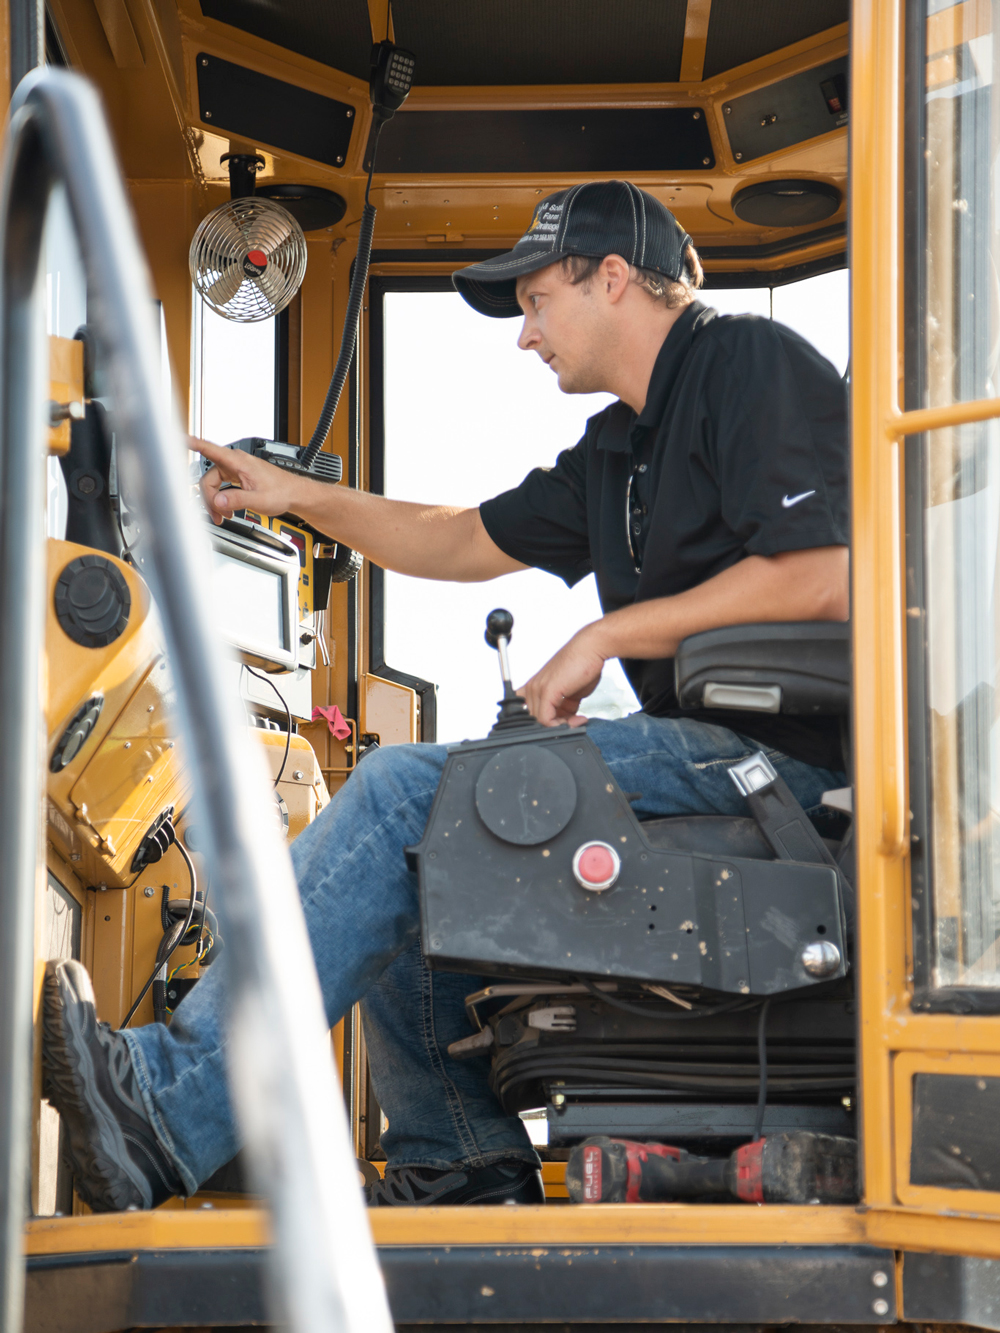 A Luft and Sons operator in a black shirt and cap is focused on maneuvering the controls inside the cab of a yellow trenching machine.